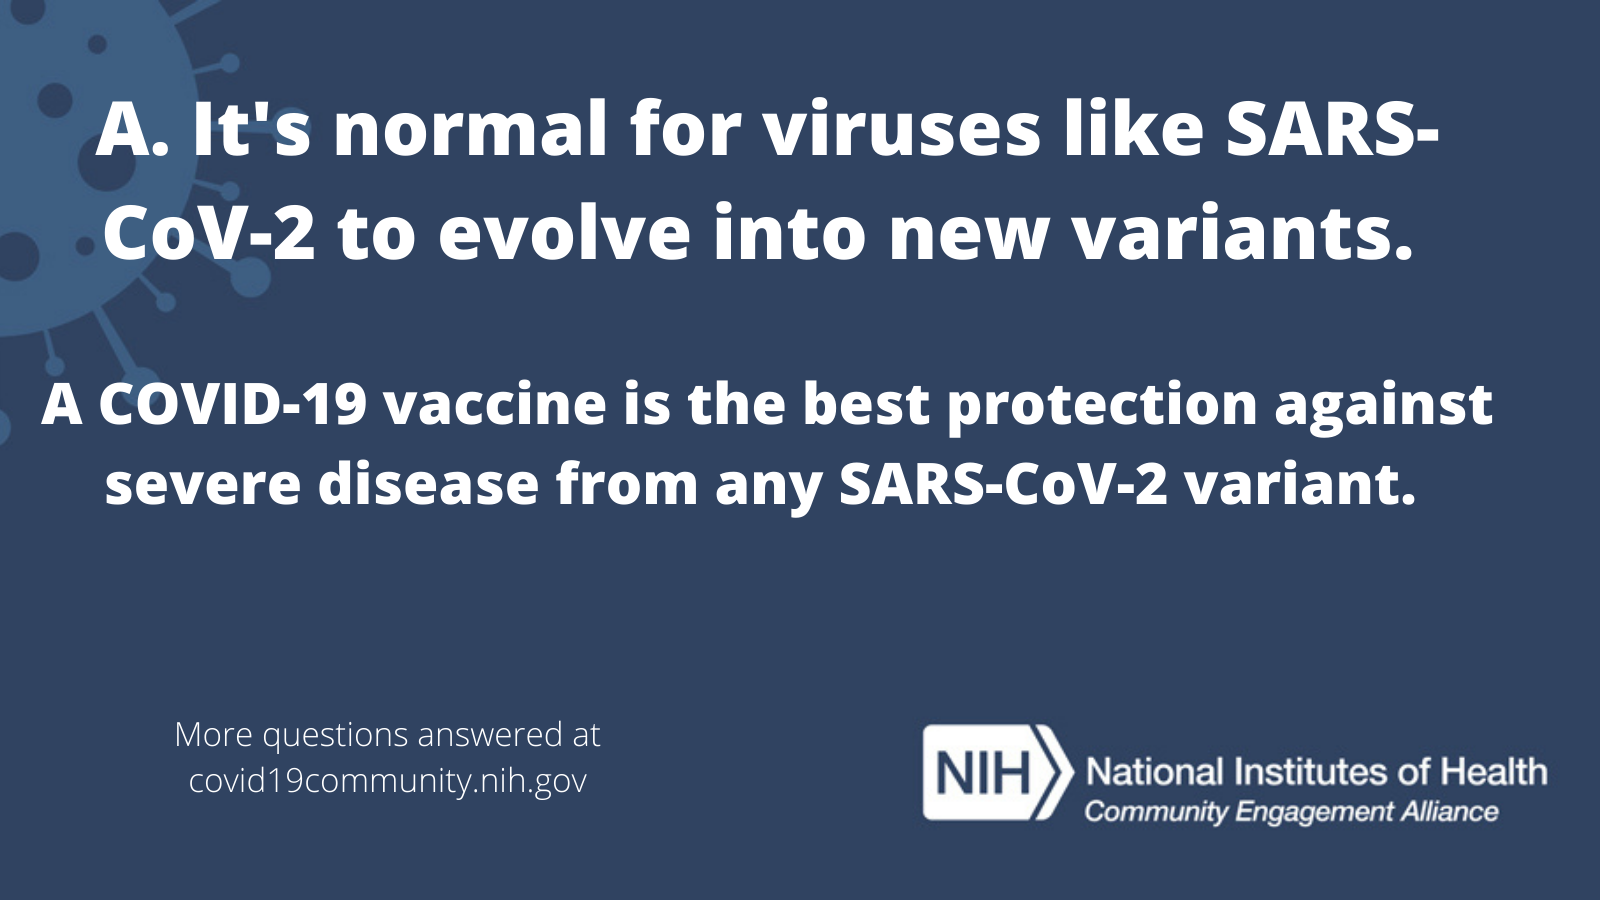 A. It's normal for viruses like SARS-CoV-2 to evolve into new variants. A COVID-19 vaccine is the best protection against severe disease from any SARS-CoV-2 virus. More vaccine questions answered at covid19community.nih.gov